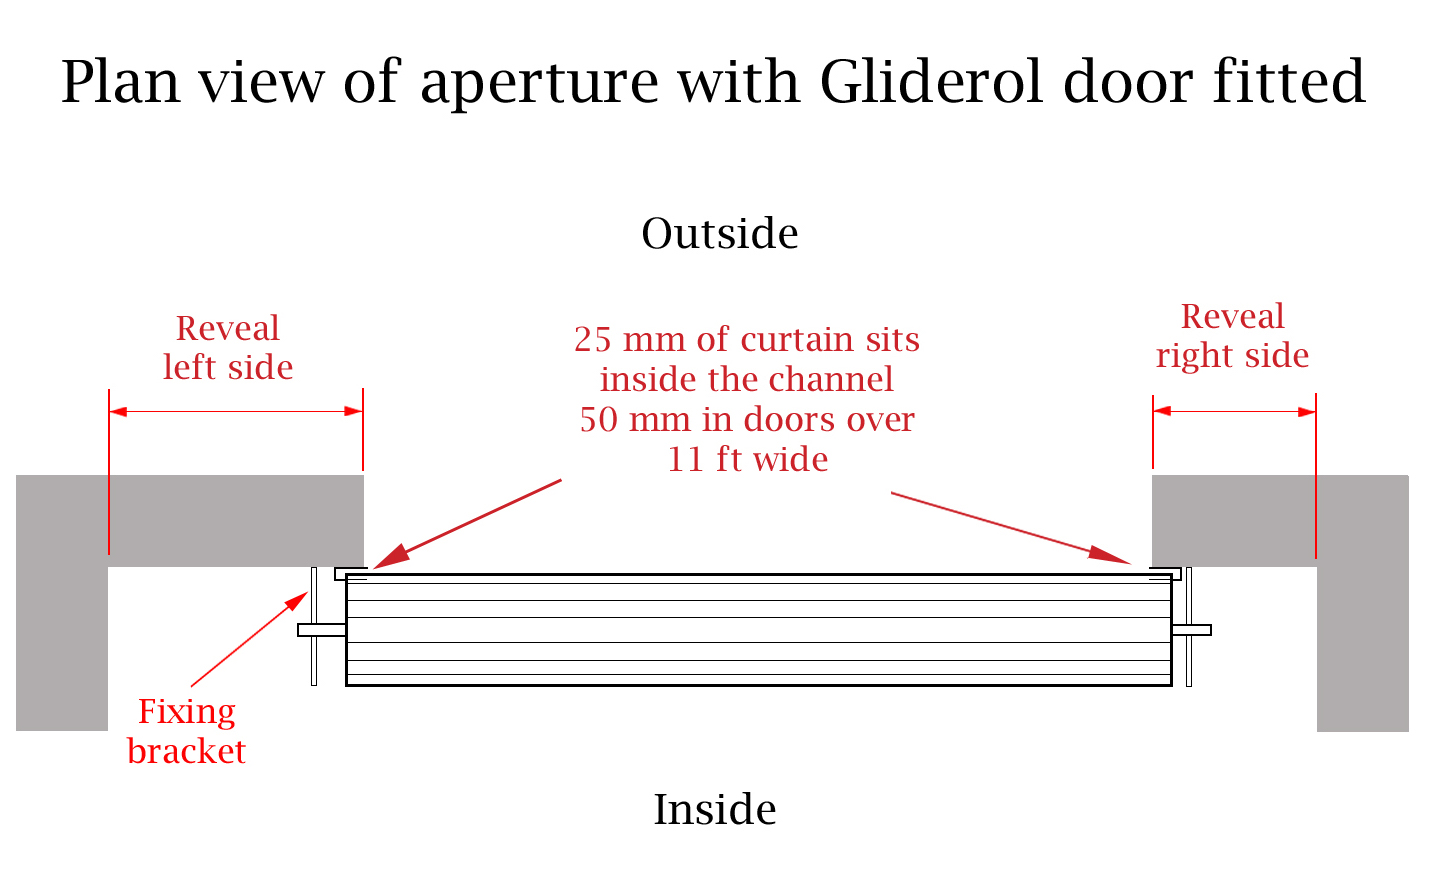 Plan view of aperture with Gliderol door fitted